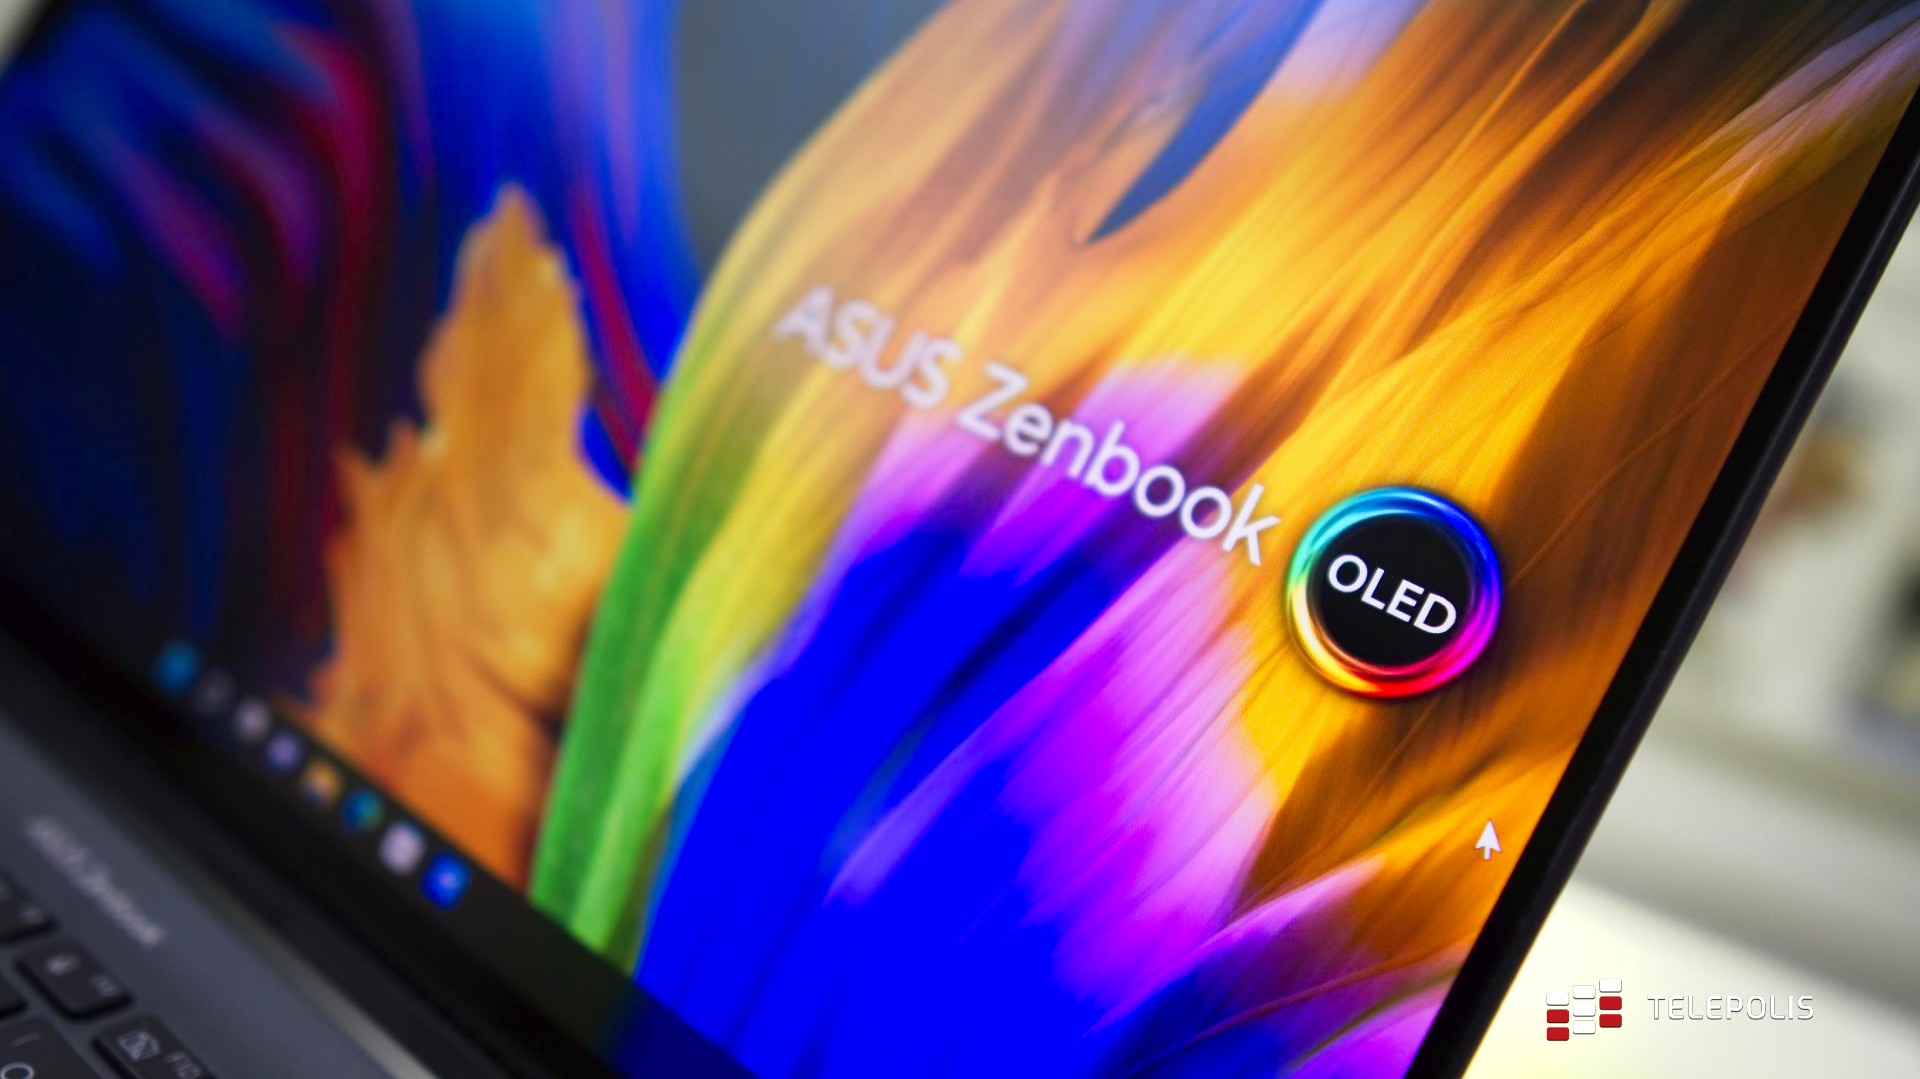 The biggest revolution since Windows 95. The time for OLED screens in laptops?